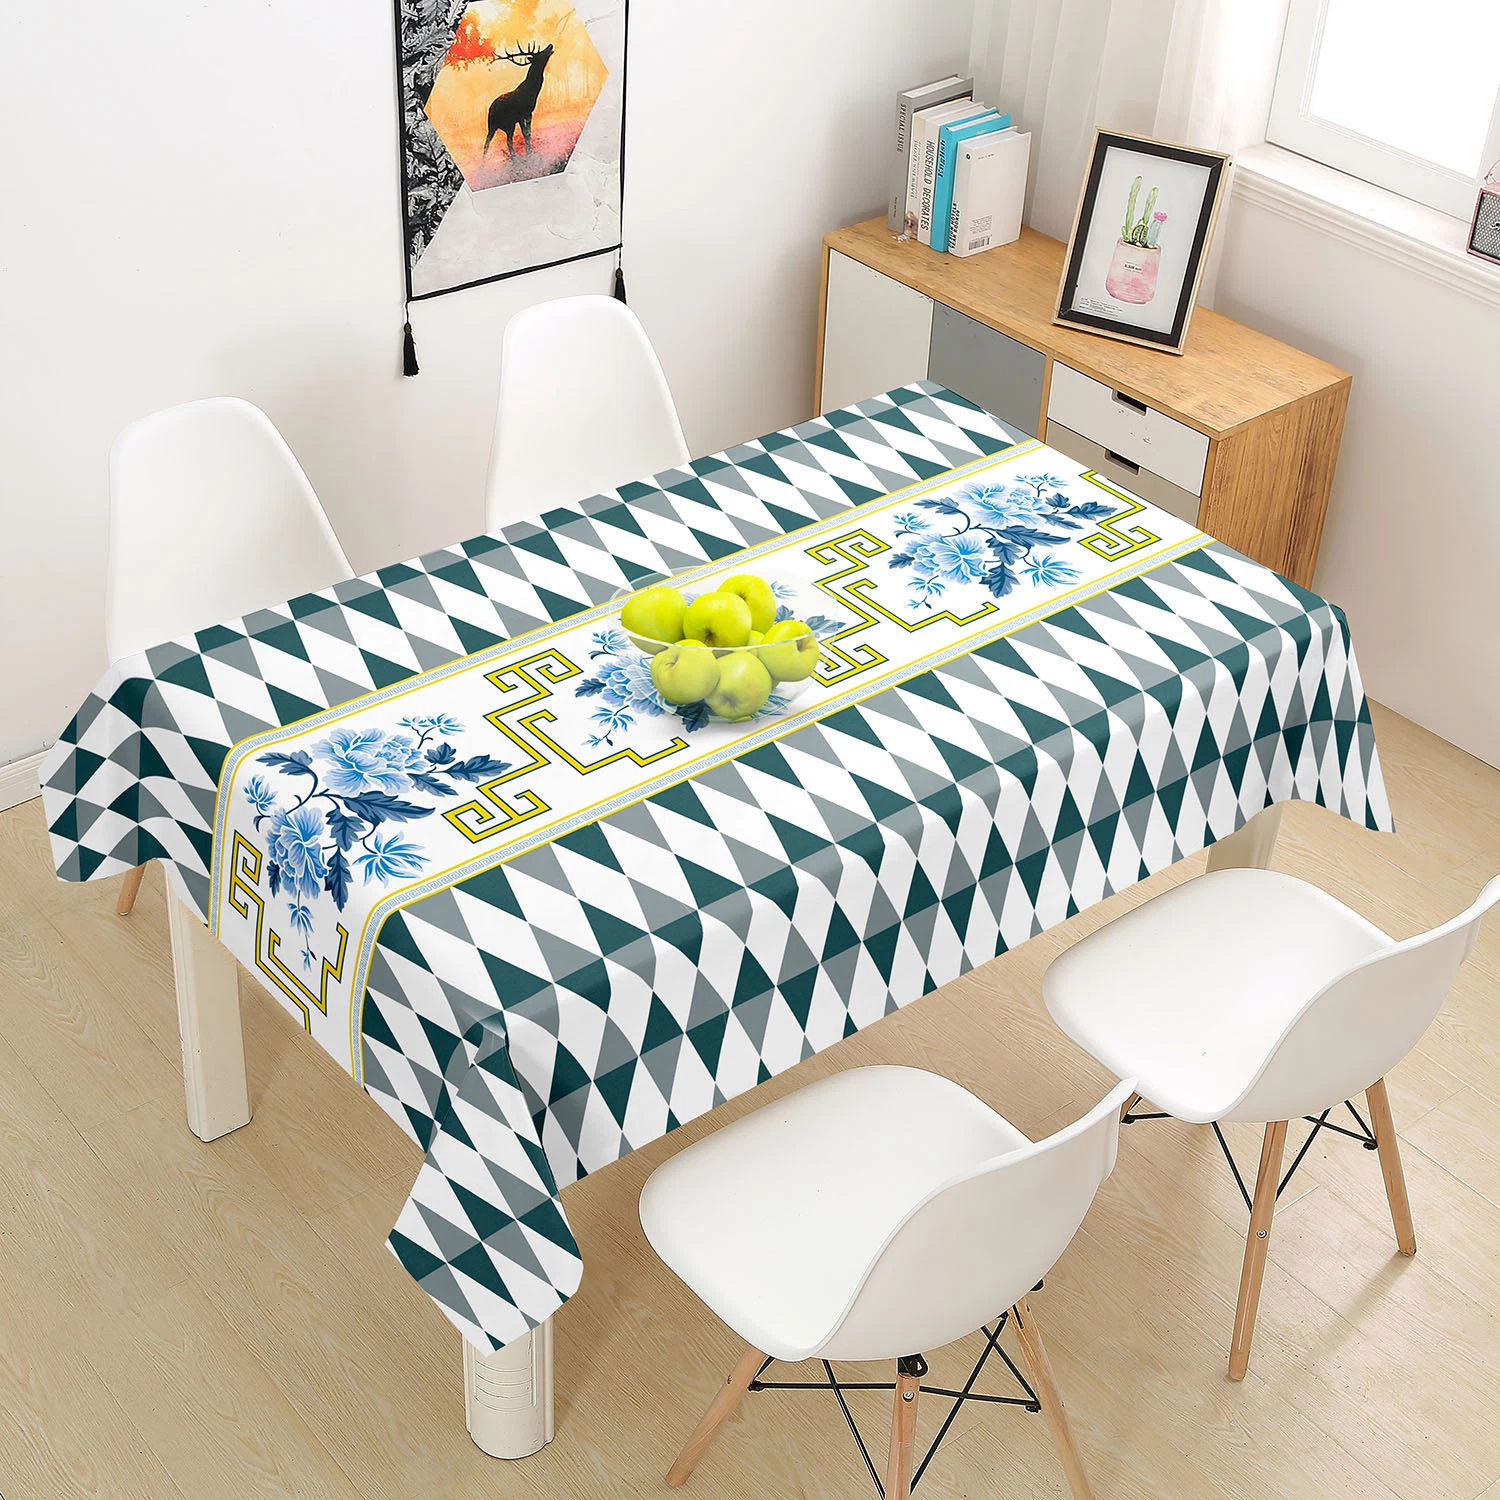 New design Reectangle Kitchen Decorative Tablecloth PVC Waterproof Oilproof Table Cover